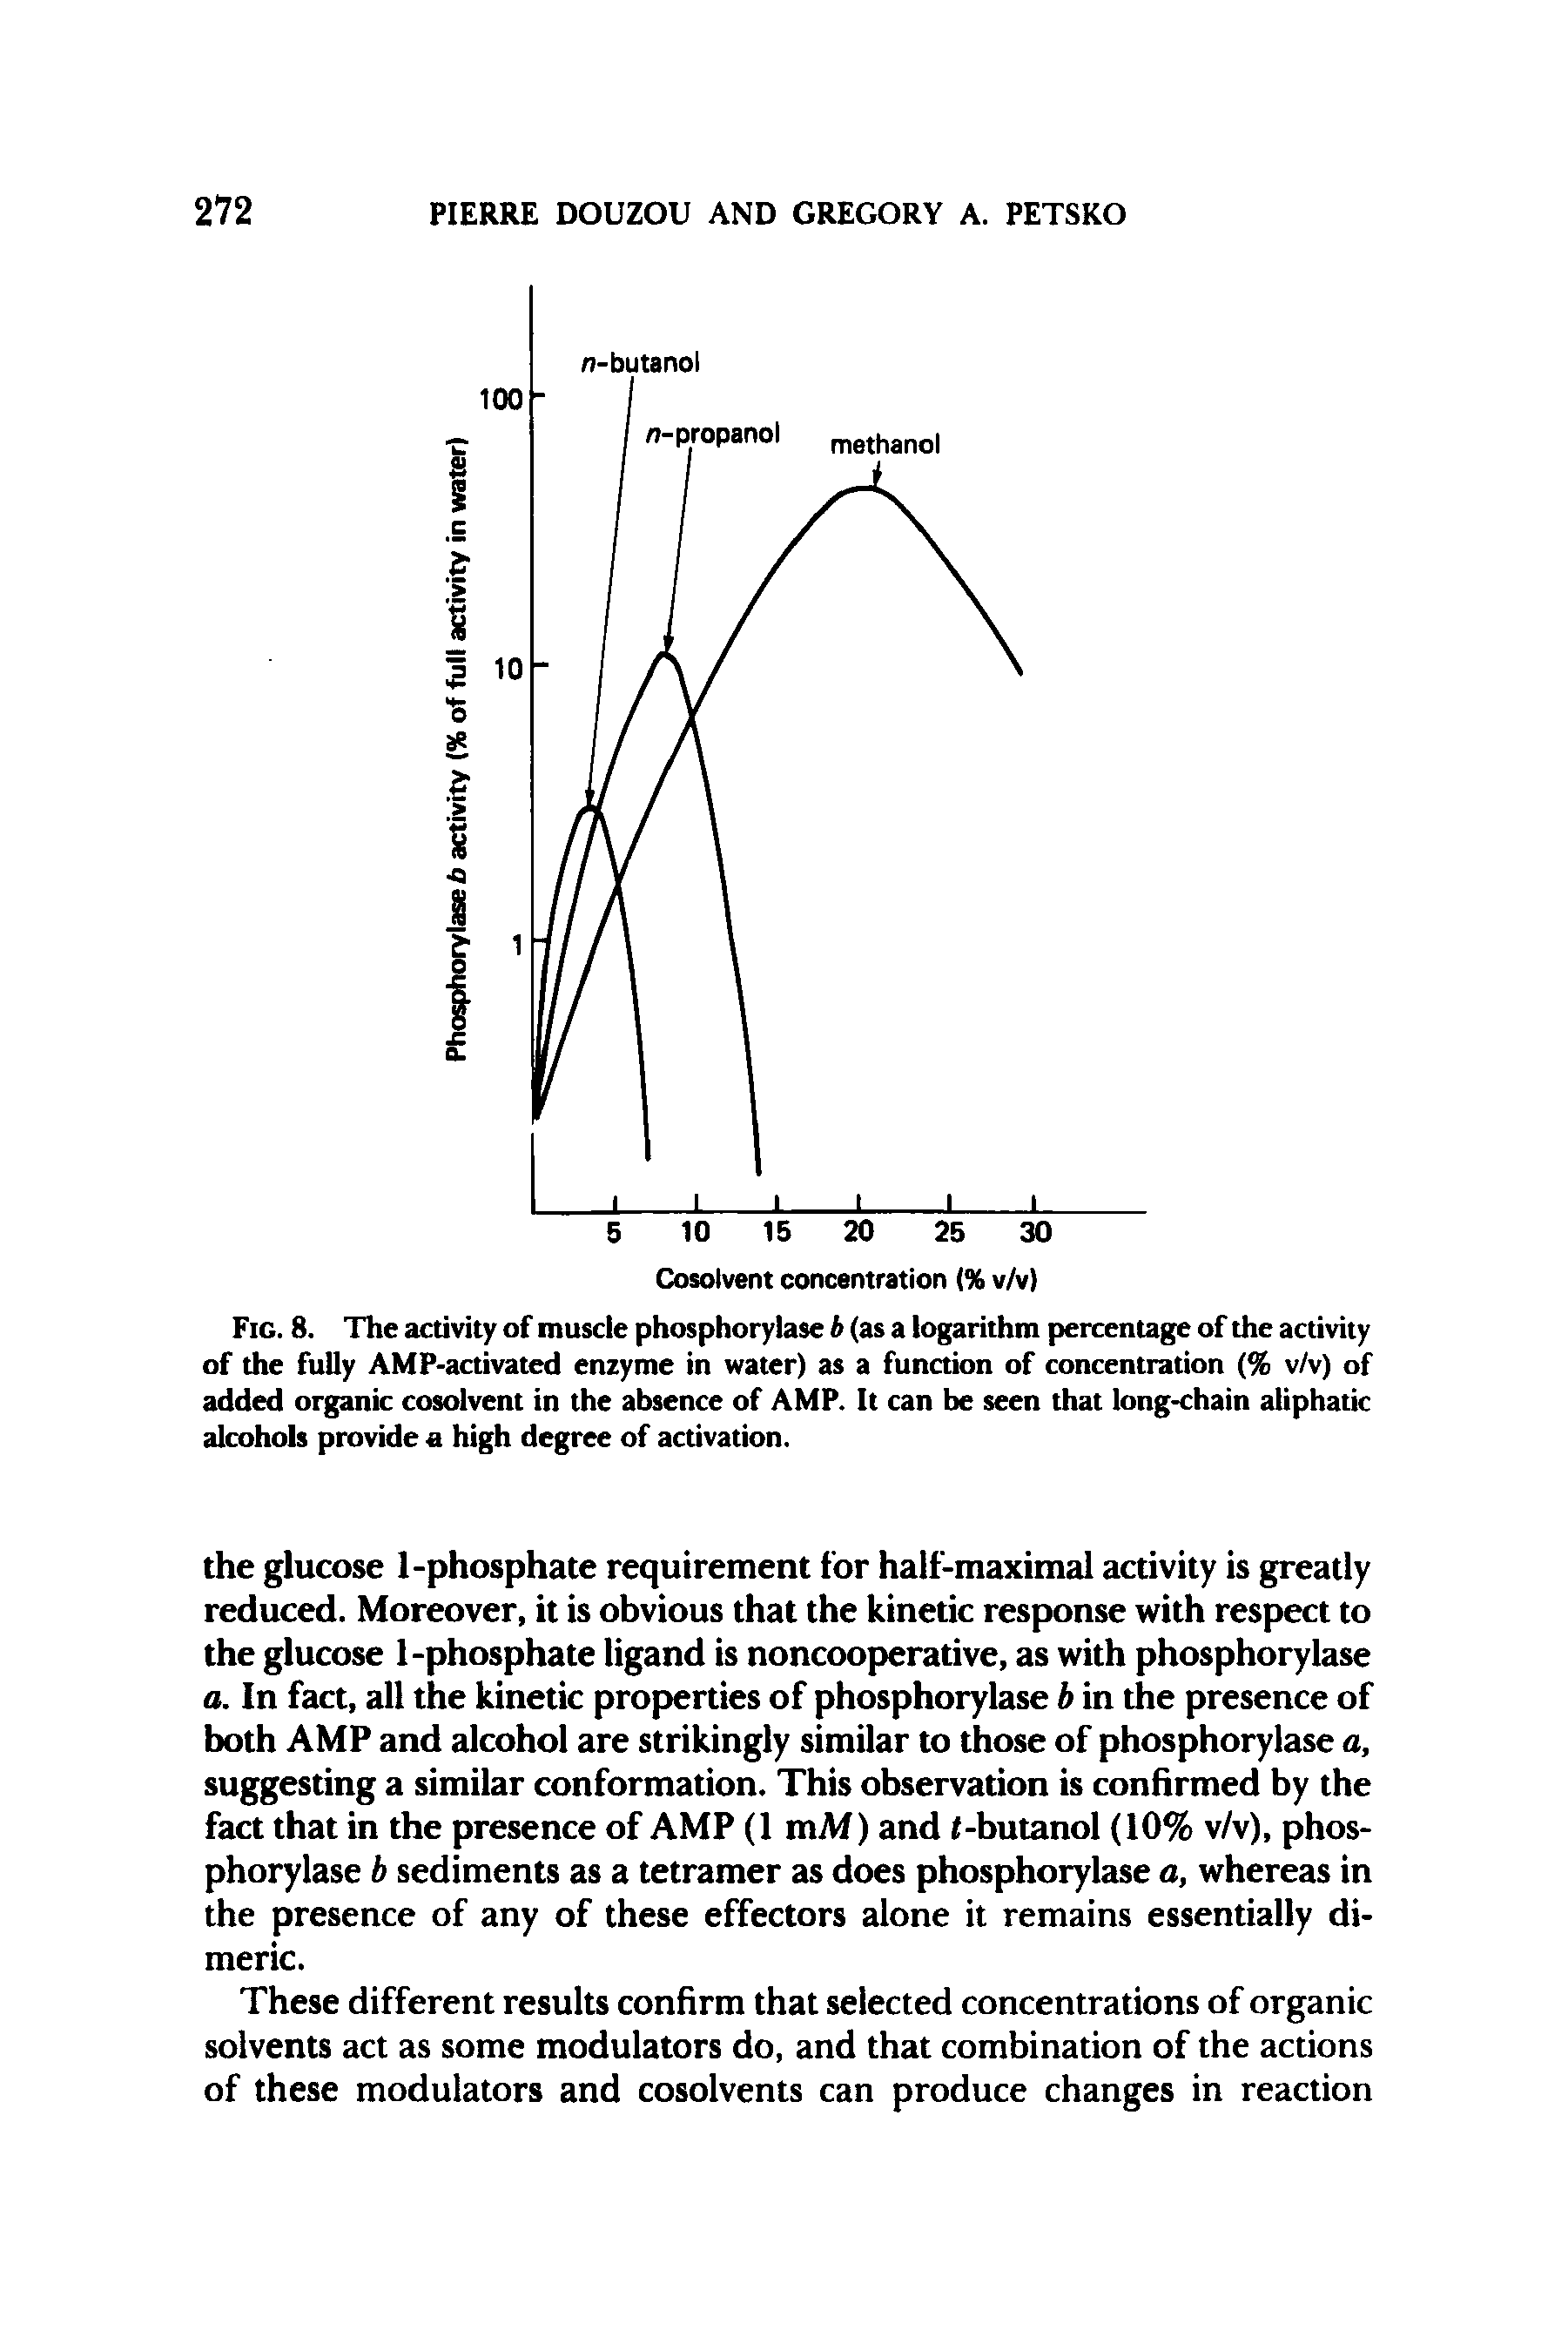 Fig. 8. The activity of muscle phosphorylase b (as a logarithm percentage of the activity of the fully AMP-activated enzyme in water) as a funaion of concentration (% v/v) of added organic cosolvent in the absence of AMP. It can be seen that long<hain aliphatic alcohols provide a high degree of activation.